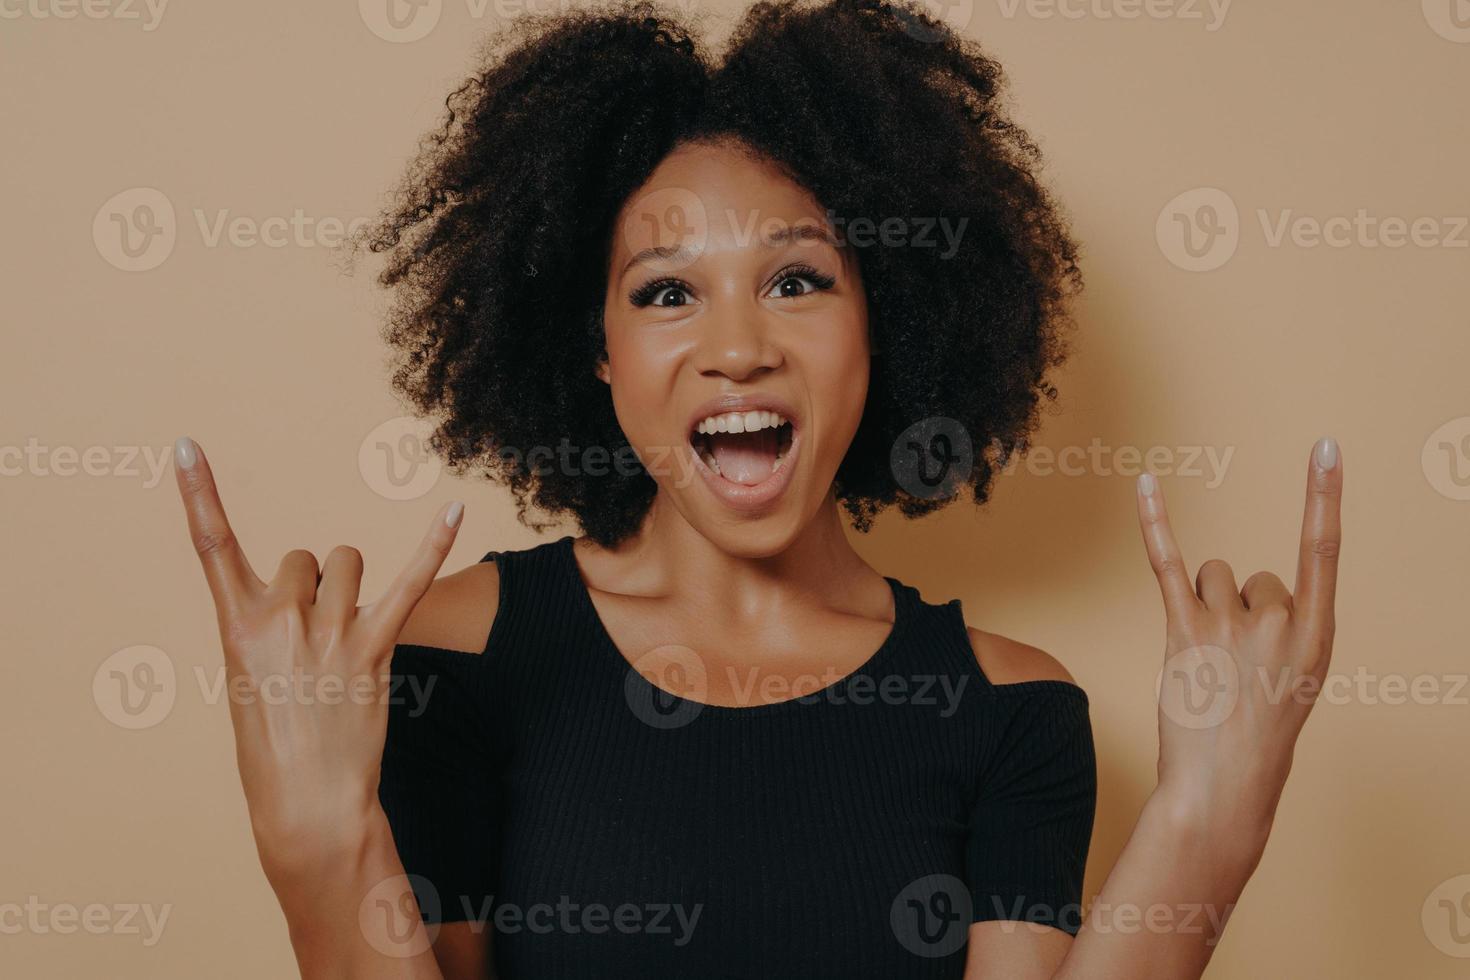 Young woman wearing black tshirt shouting with crazy facial expression doing rock-n-roll symbol photo